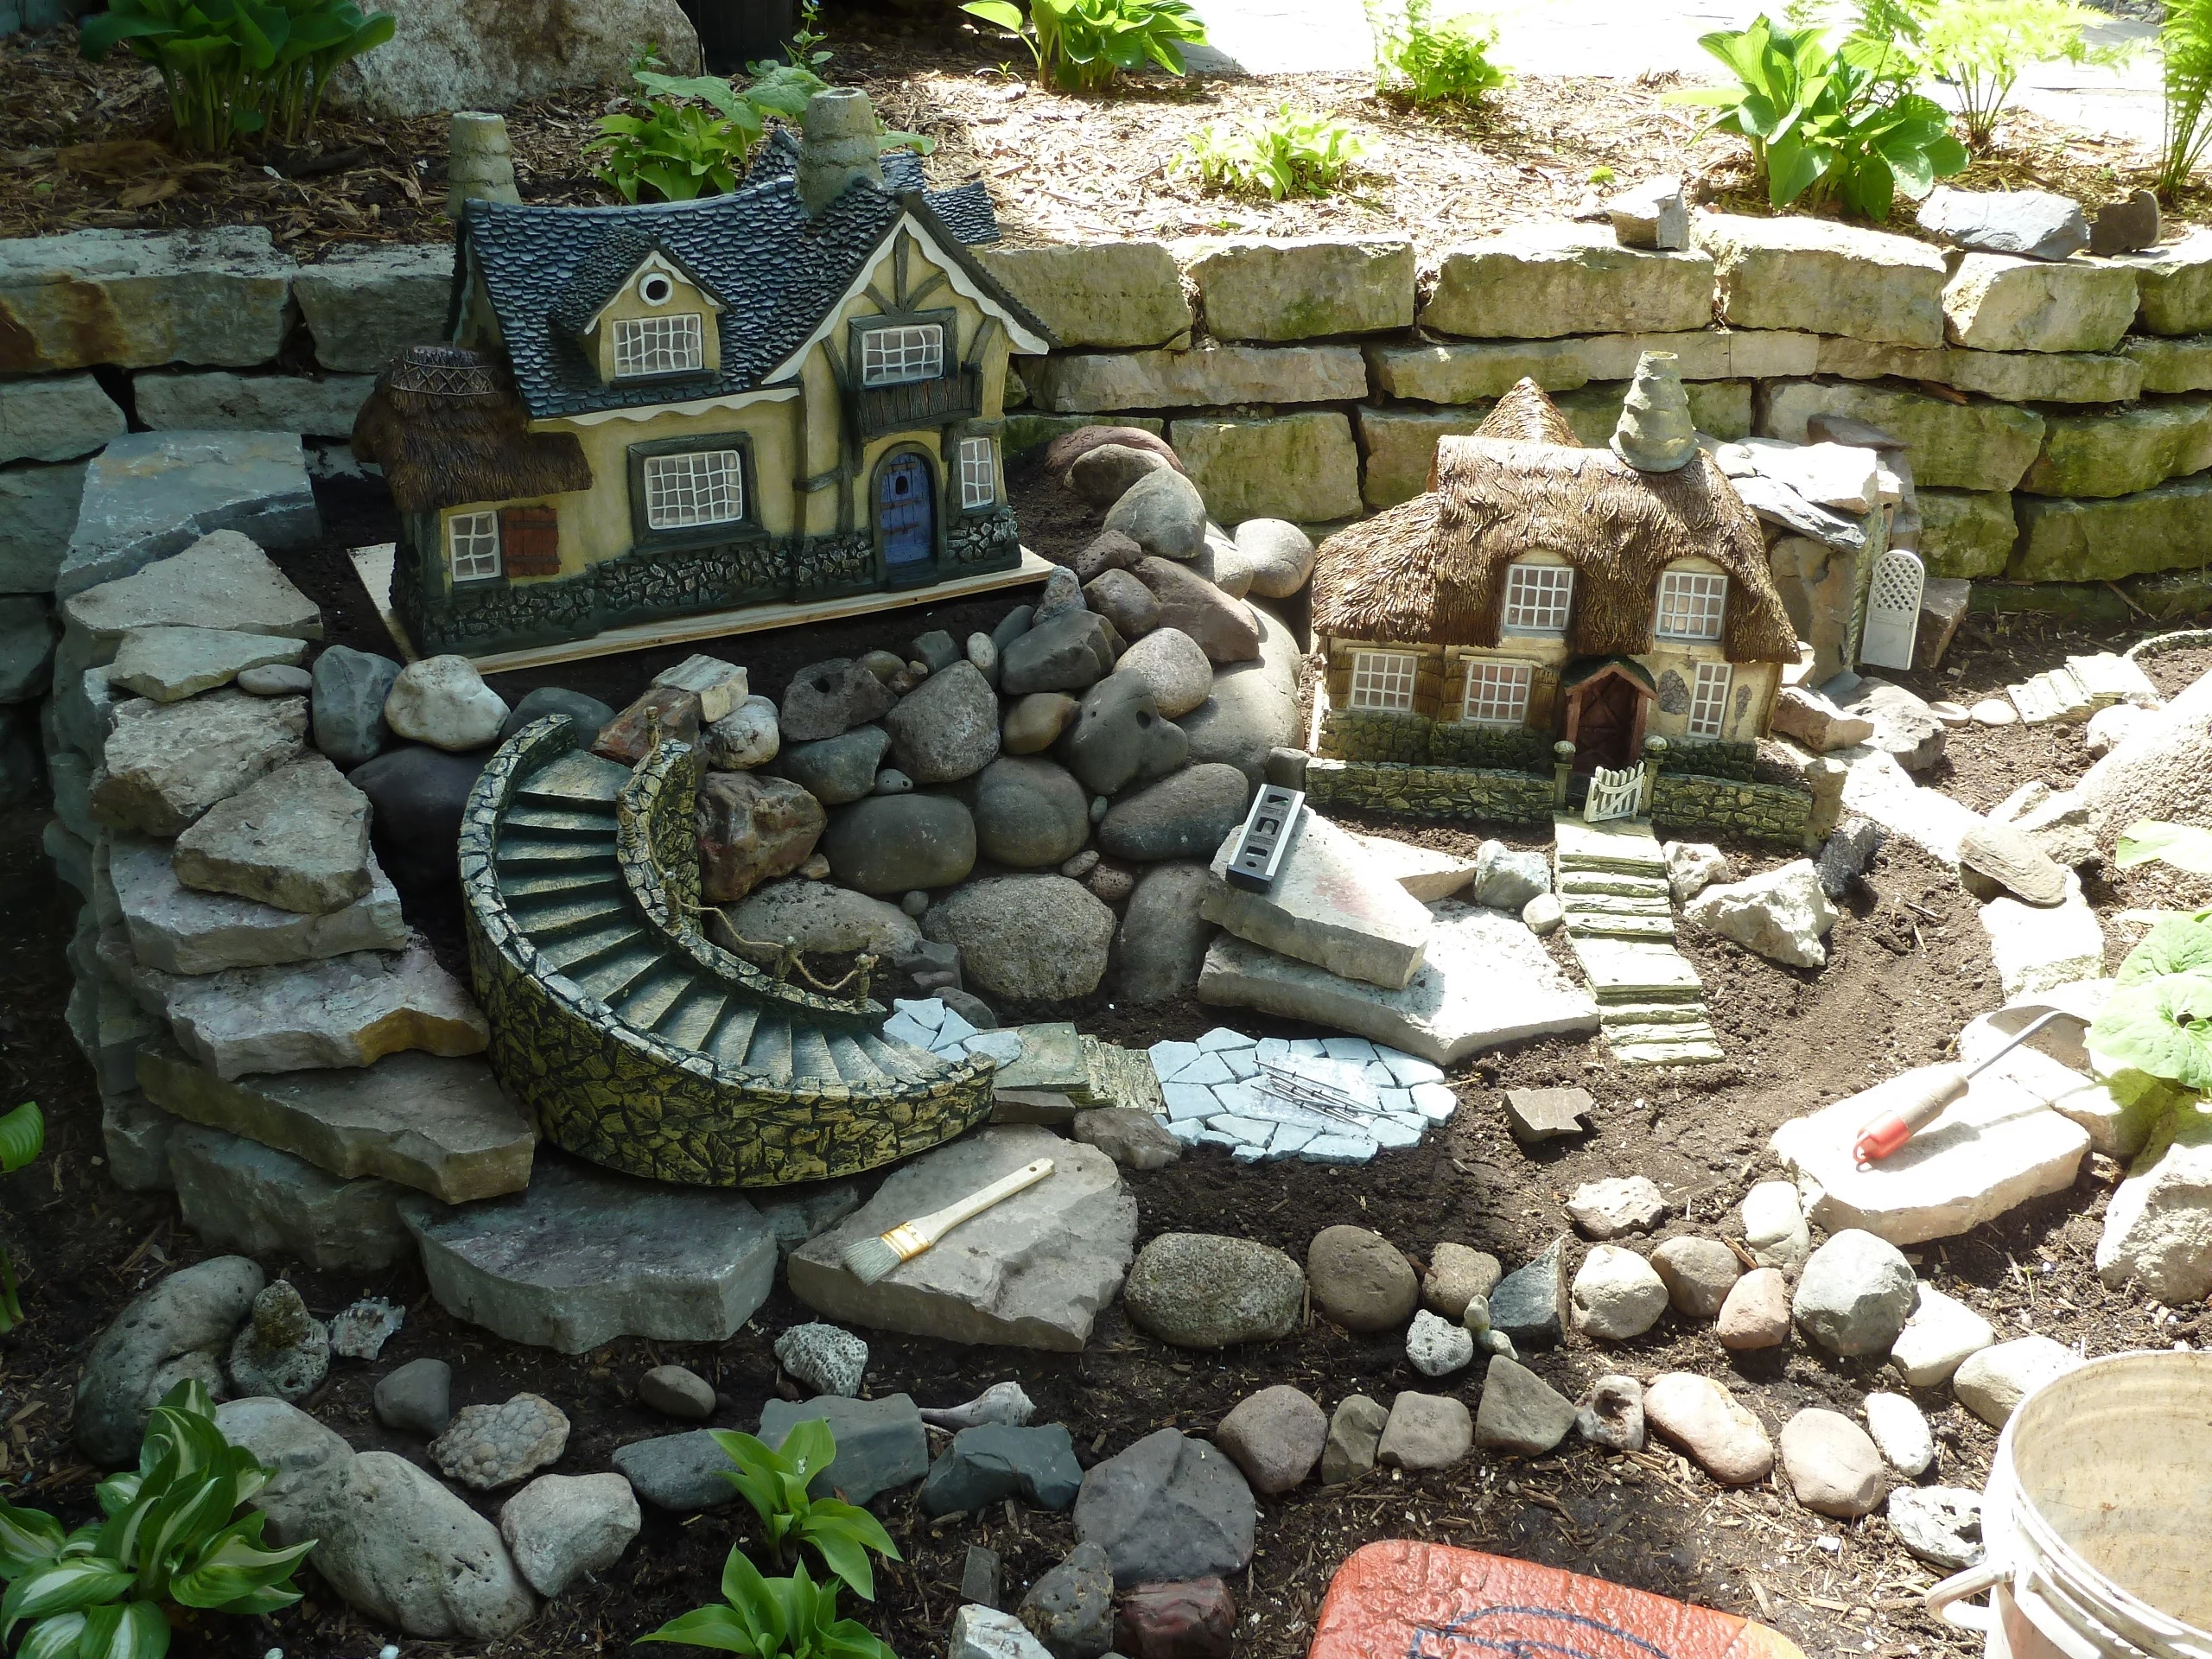 fairy garden pictures, garden with lots of gray stones of different sizes, decorated with two miniature houses, several green plants and tools